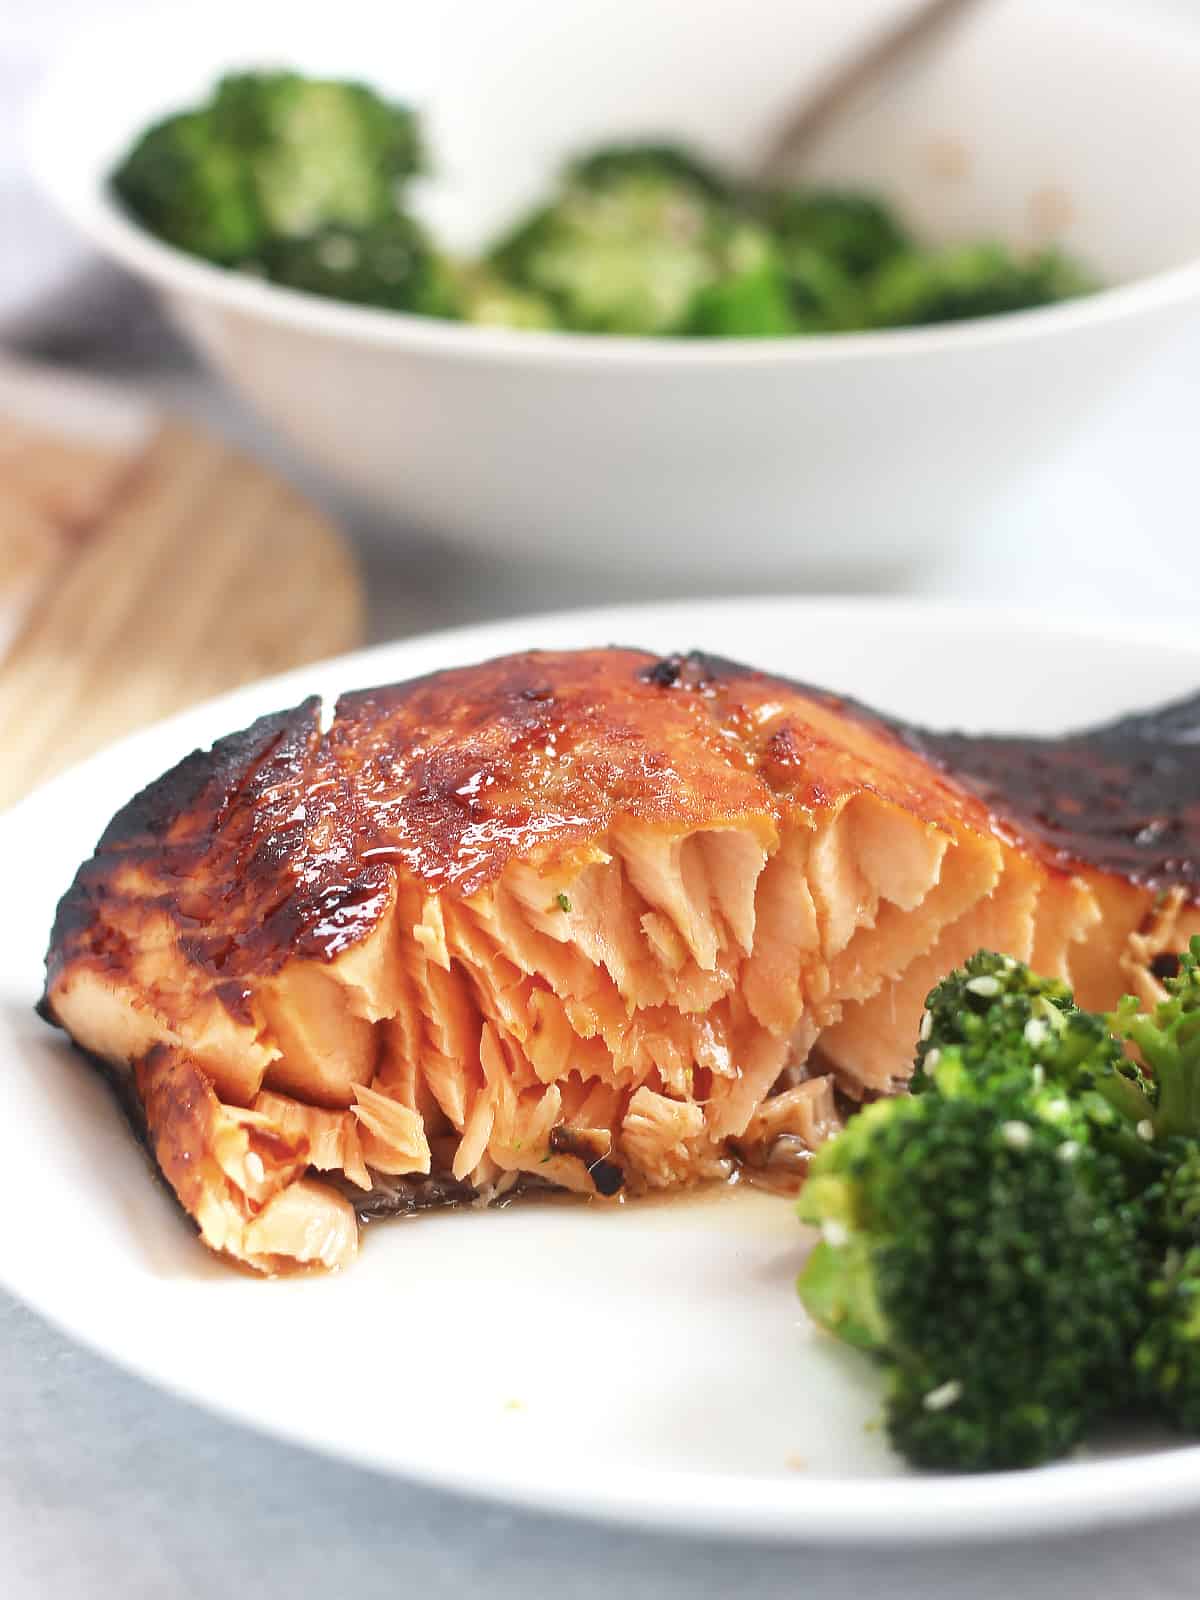 A piece of air fried salmon served on a plate with broccoli.